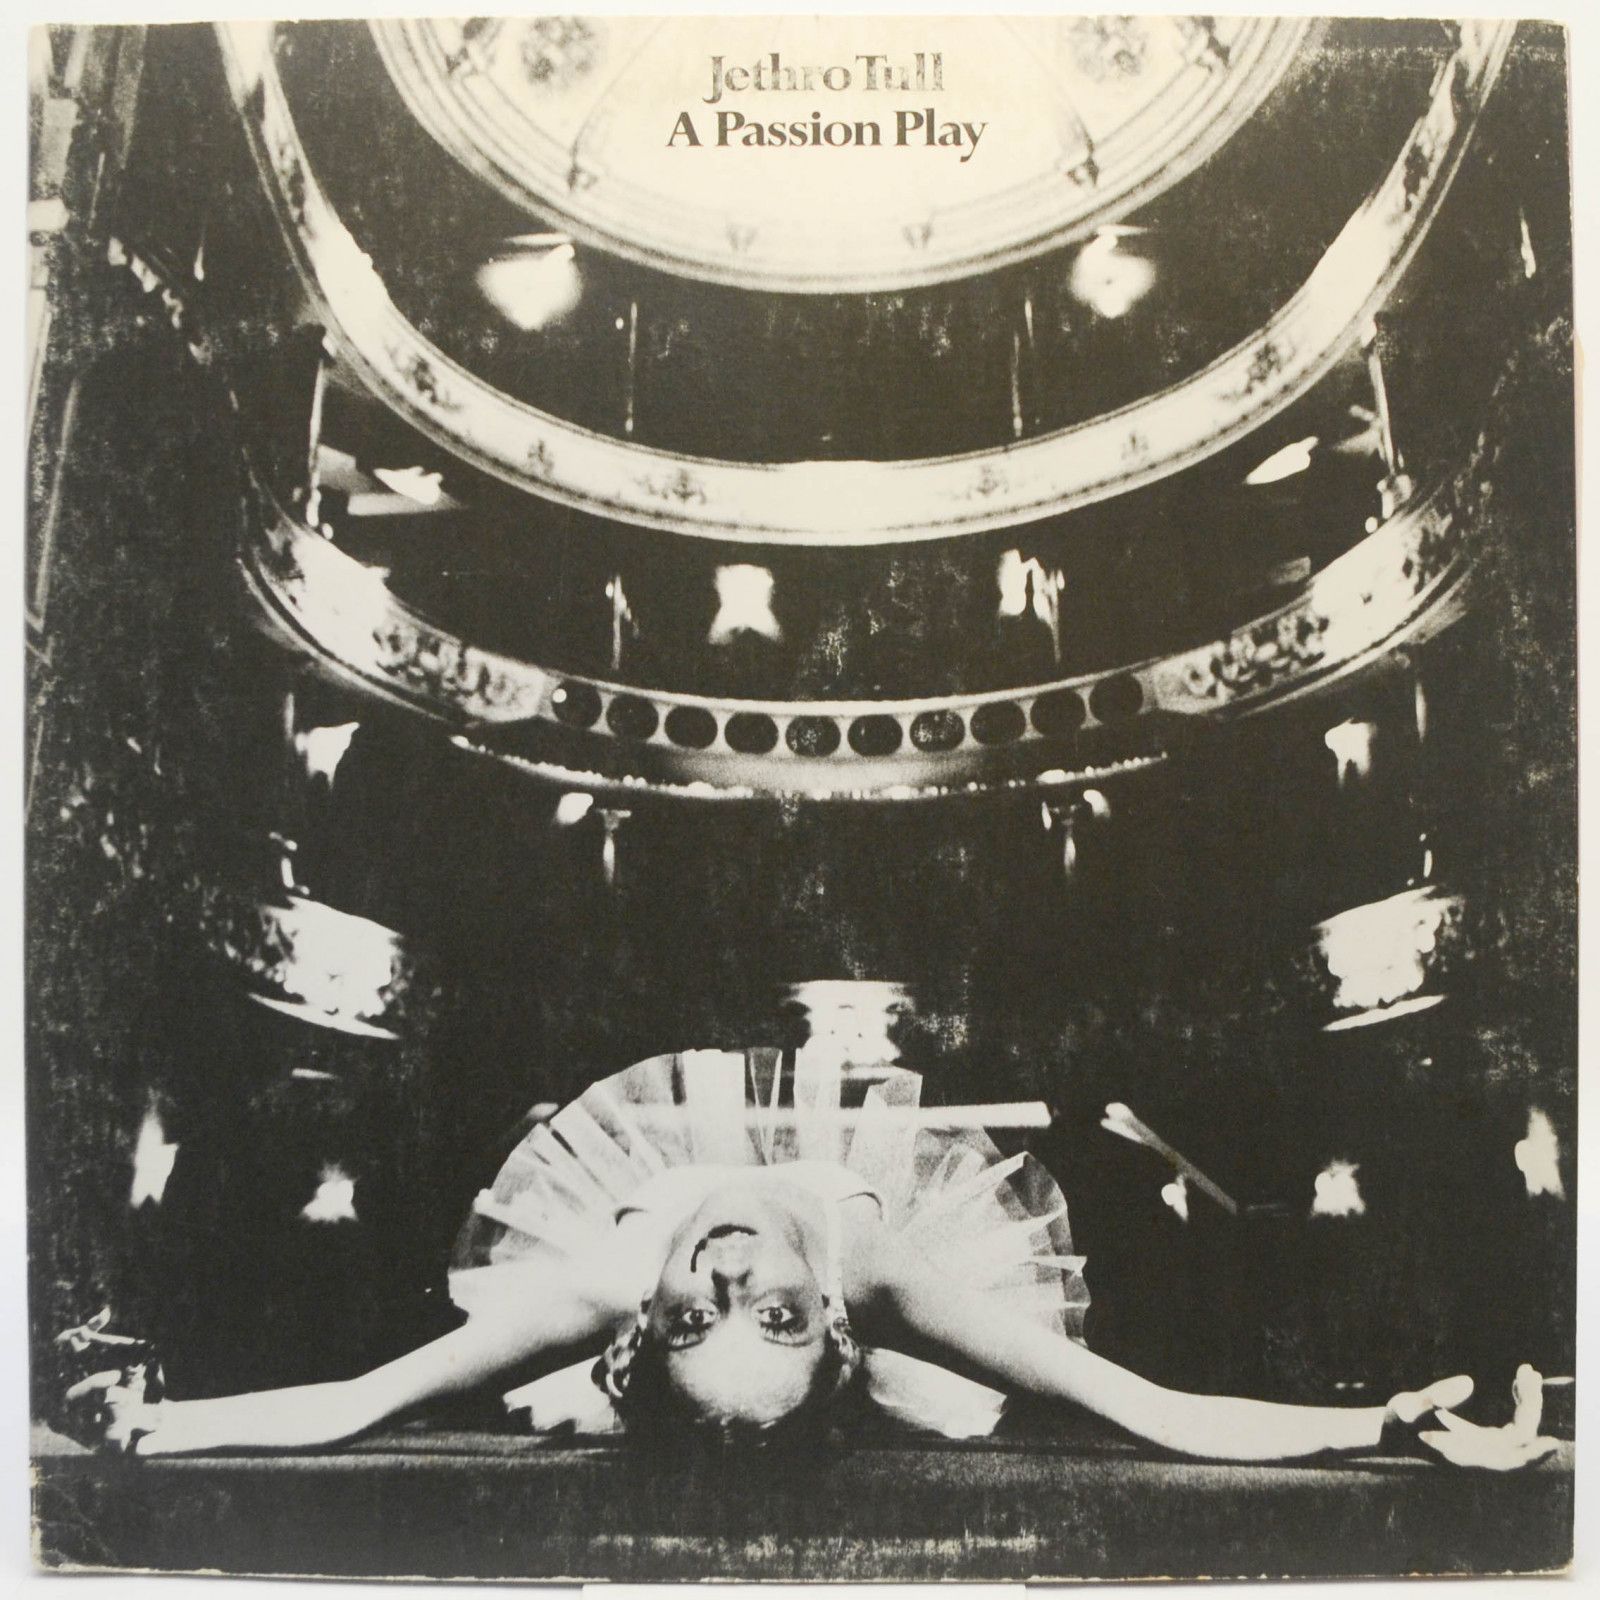 Jethro Tull — A Passion Play (booklet), 1973